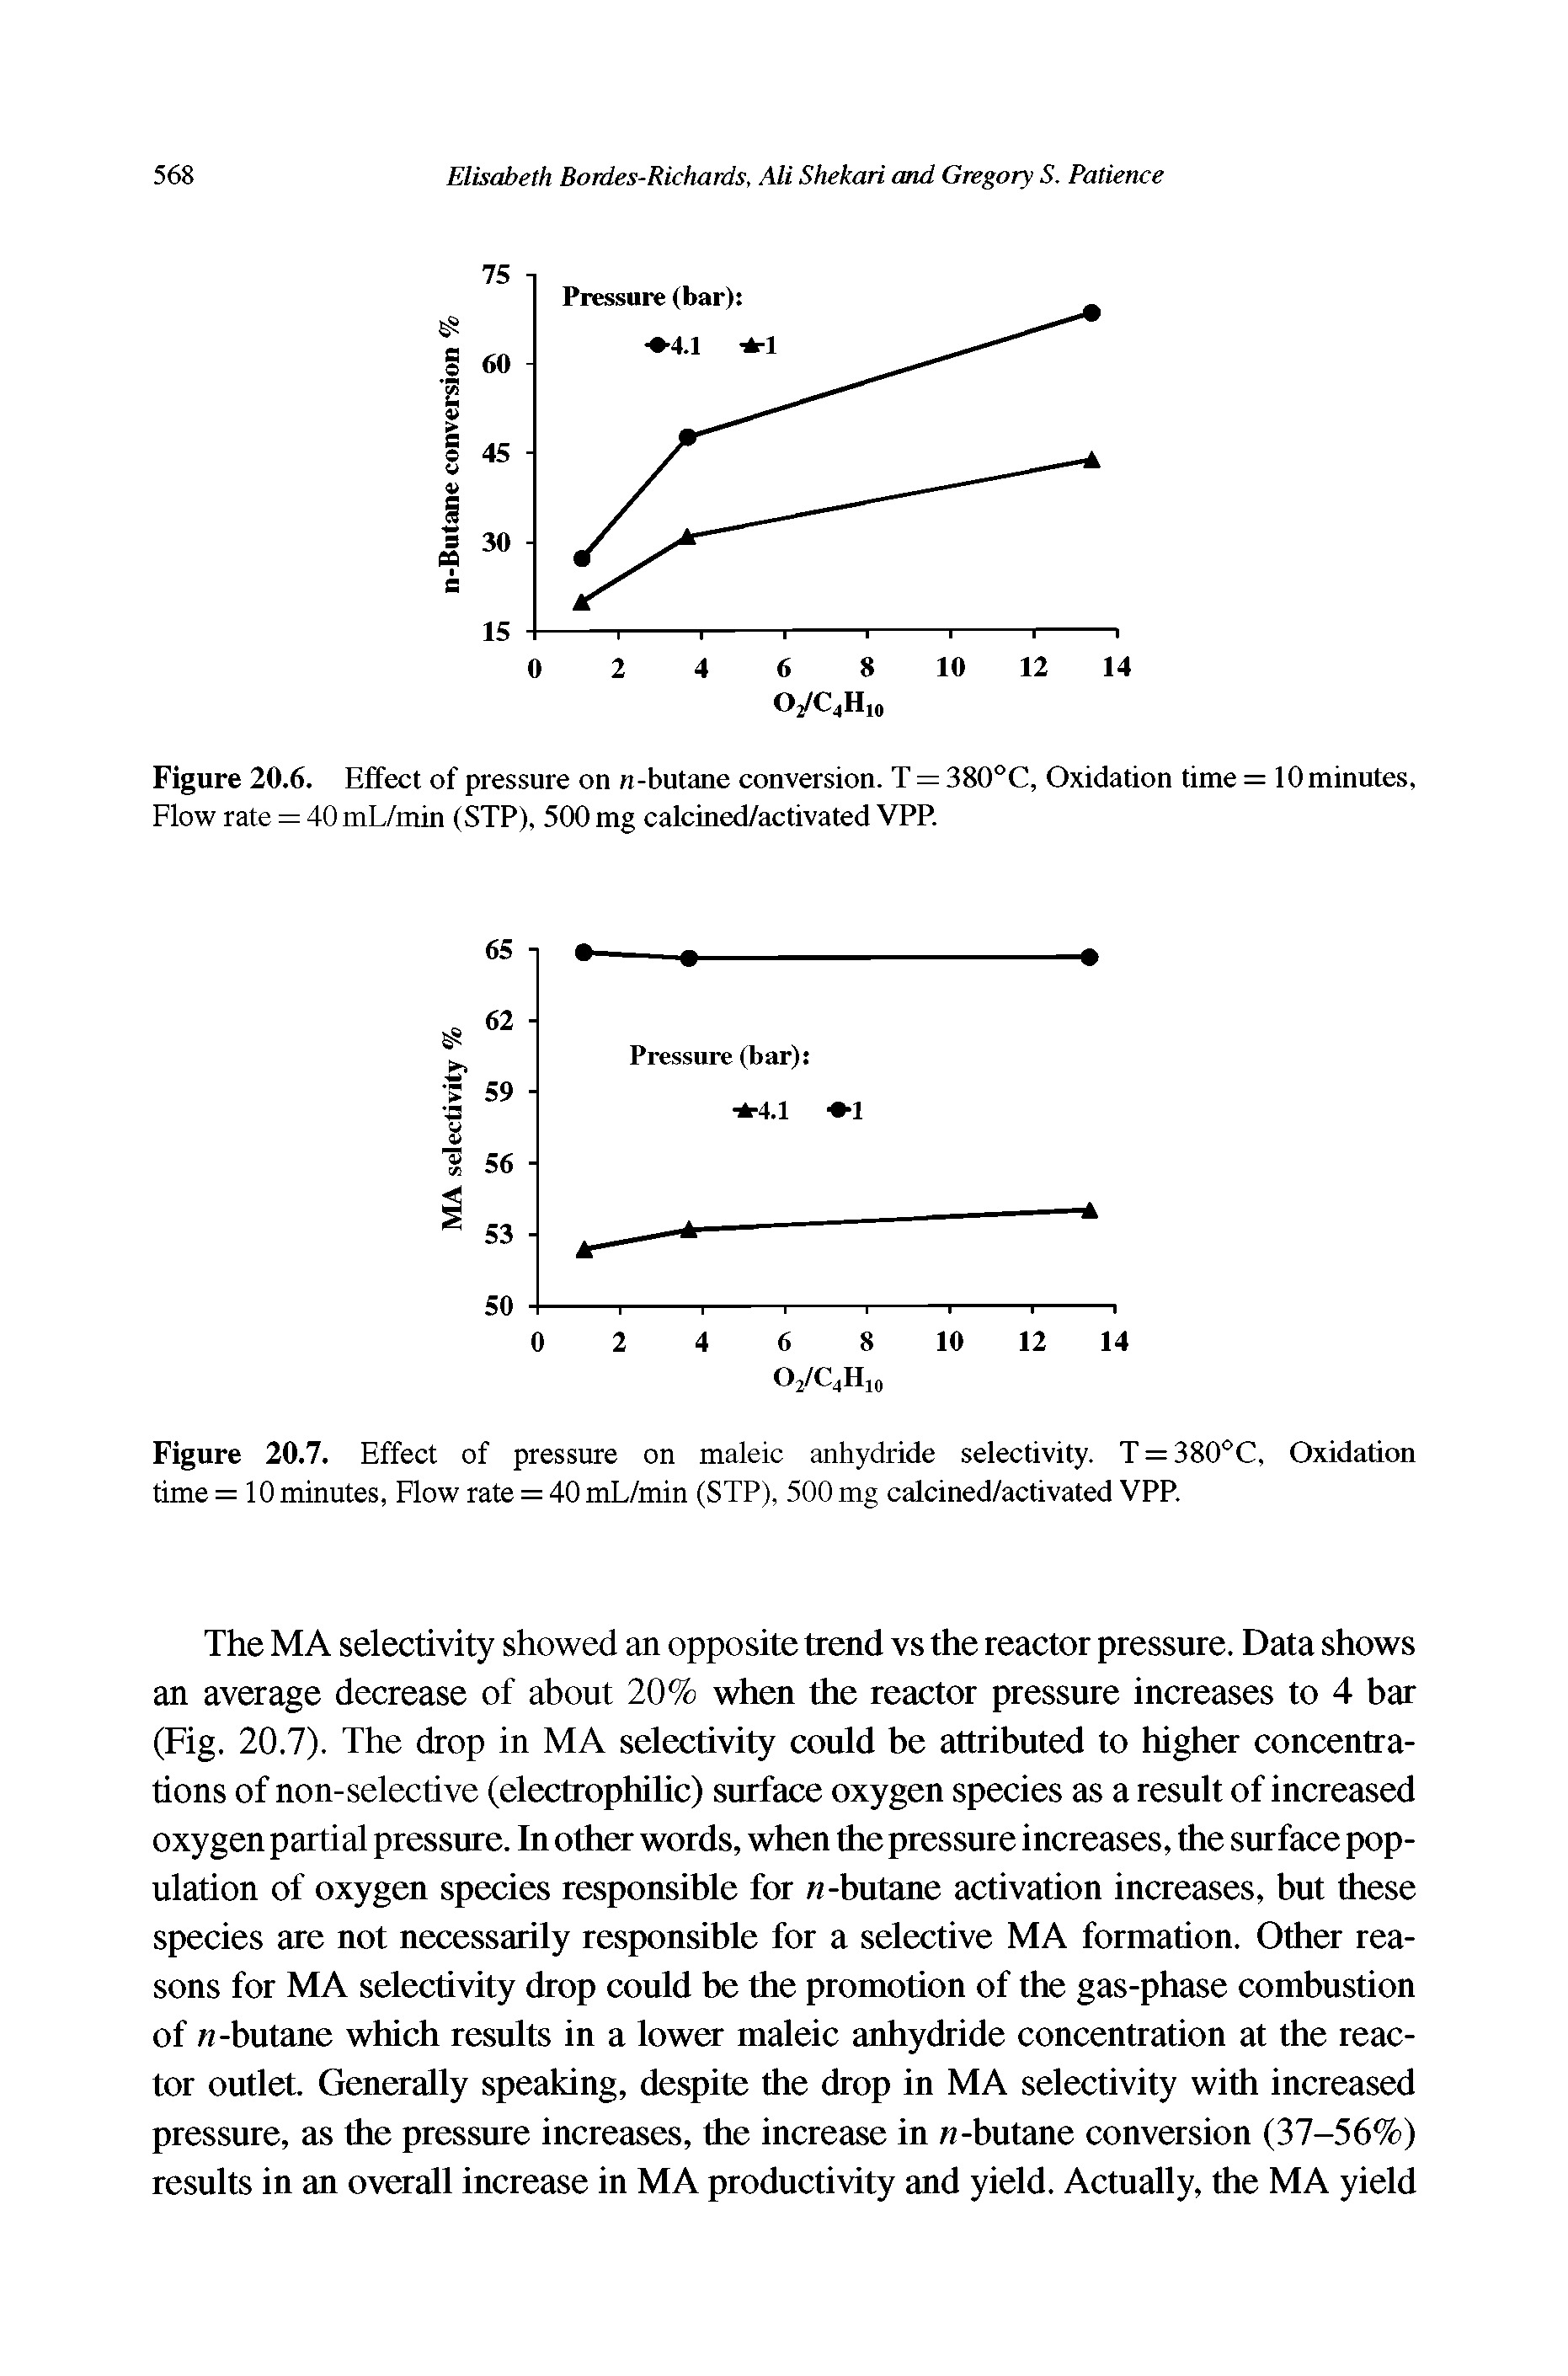 Figure 20.7. Effect of pressure on maleic anhydride selectivity. T = 380 C, Oxidation time = 10 minutes, Flow rate = 40 mL/min (STP), 500 mg calcined/activated VPP.